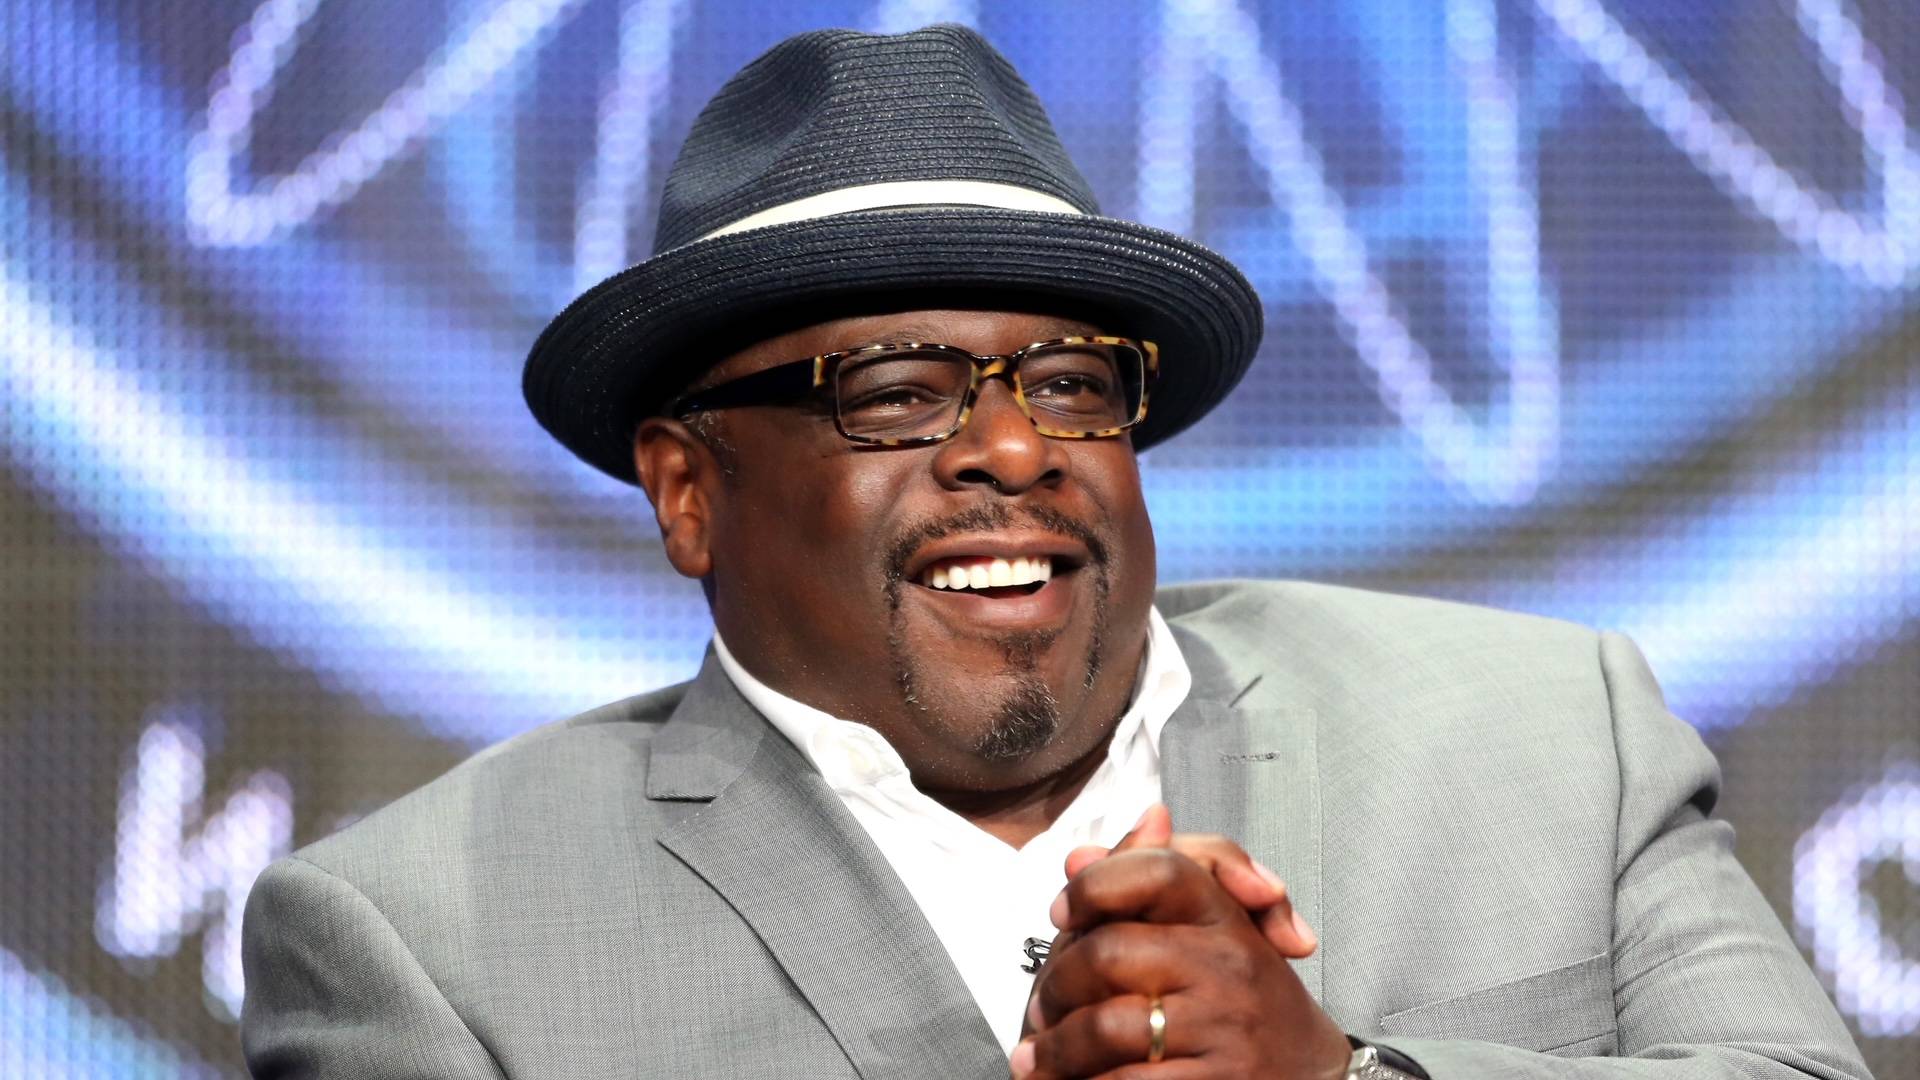 Cedric the Entertainer on BET Buzz 2020.